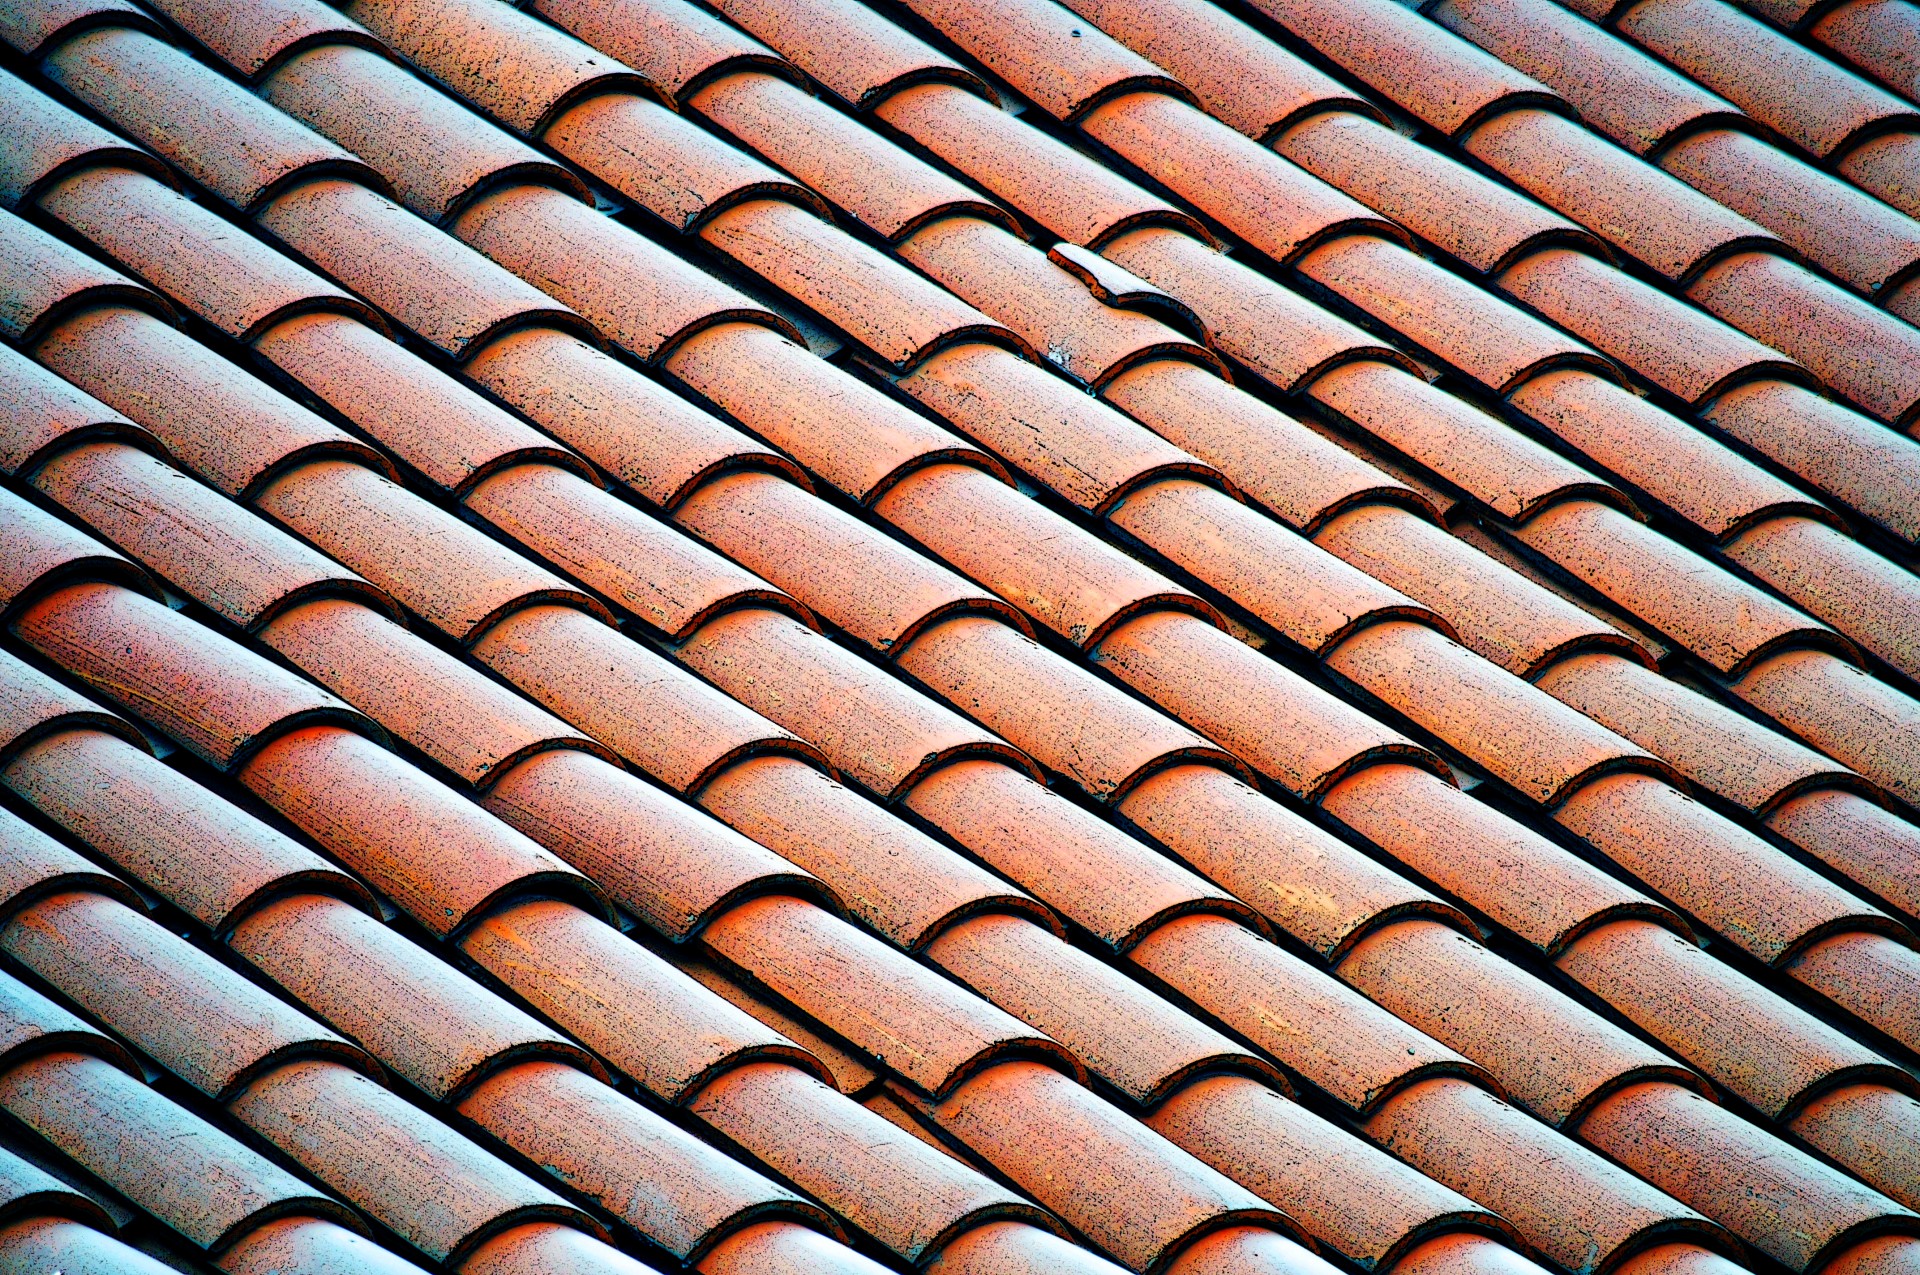 Closeup of the beautiful texture and design of a tile roof